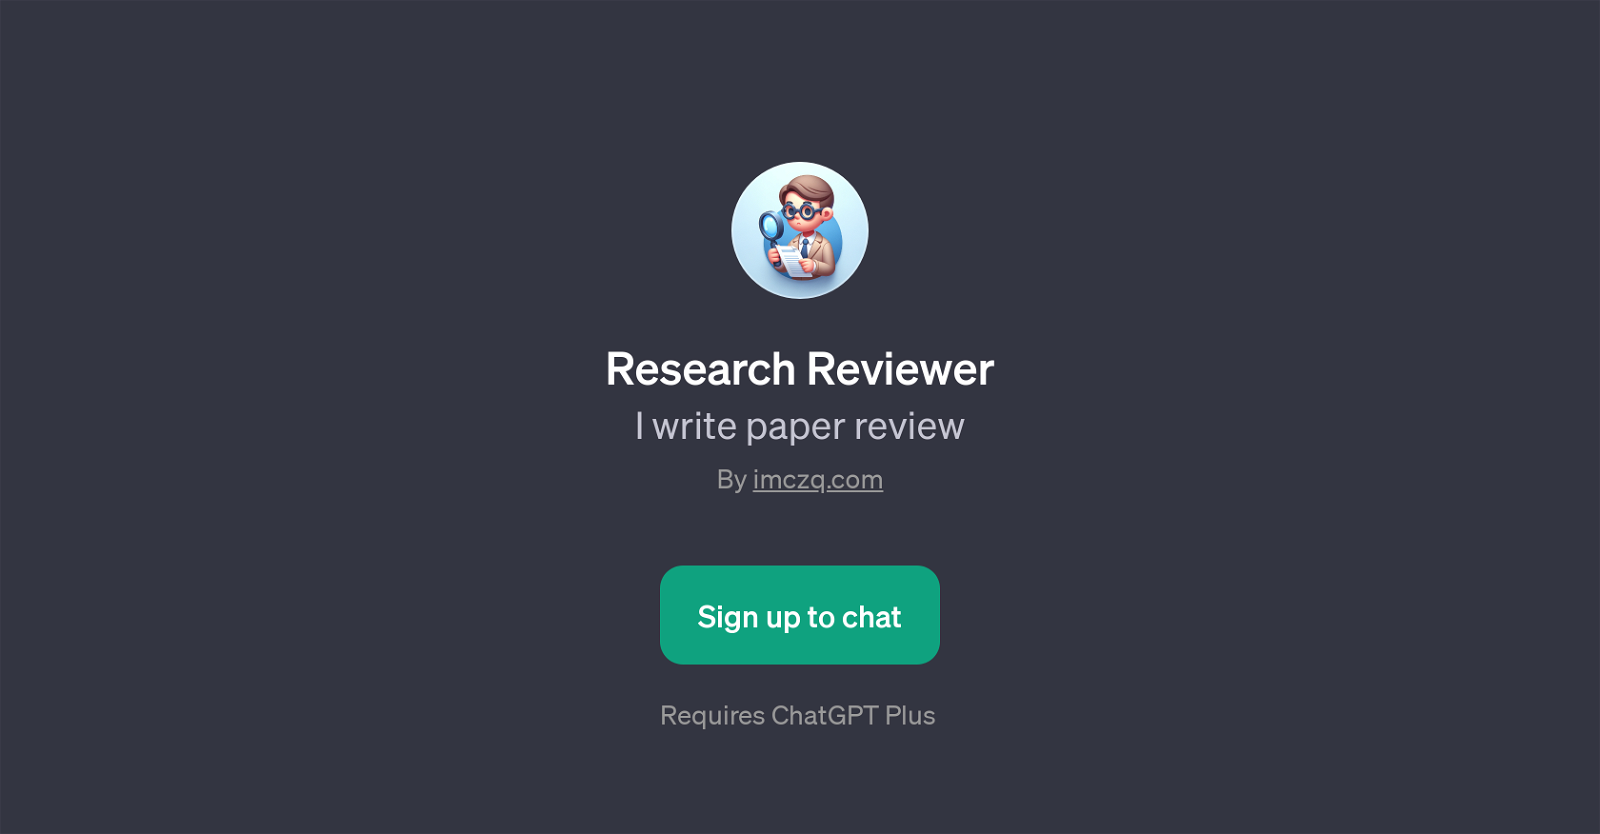 Research Reviewer website